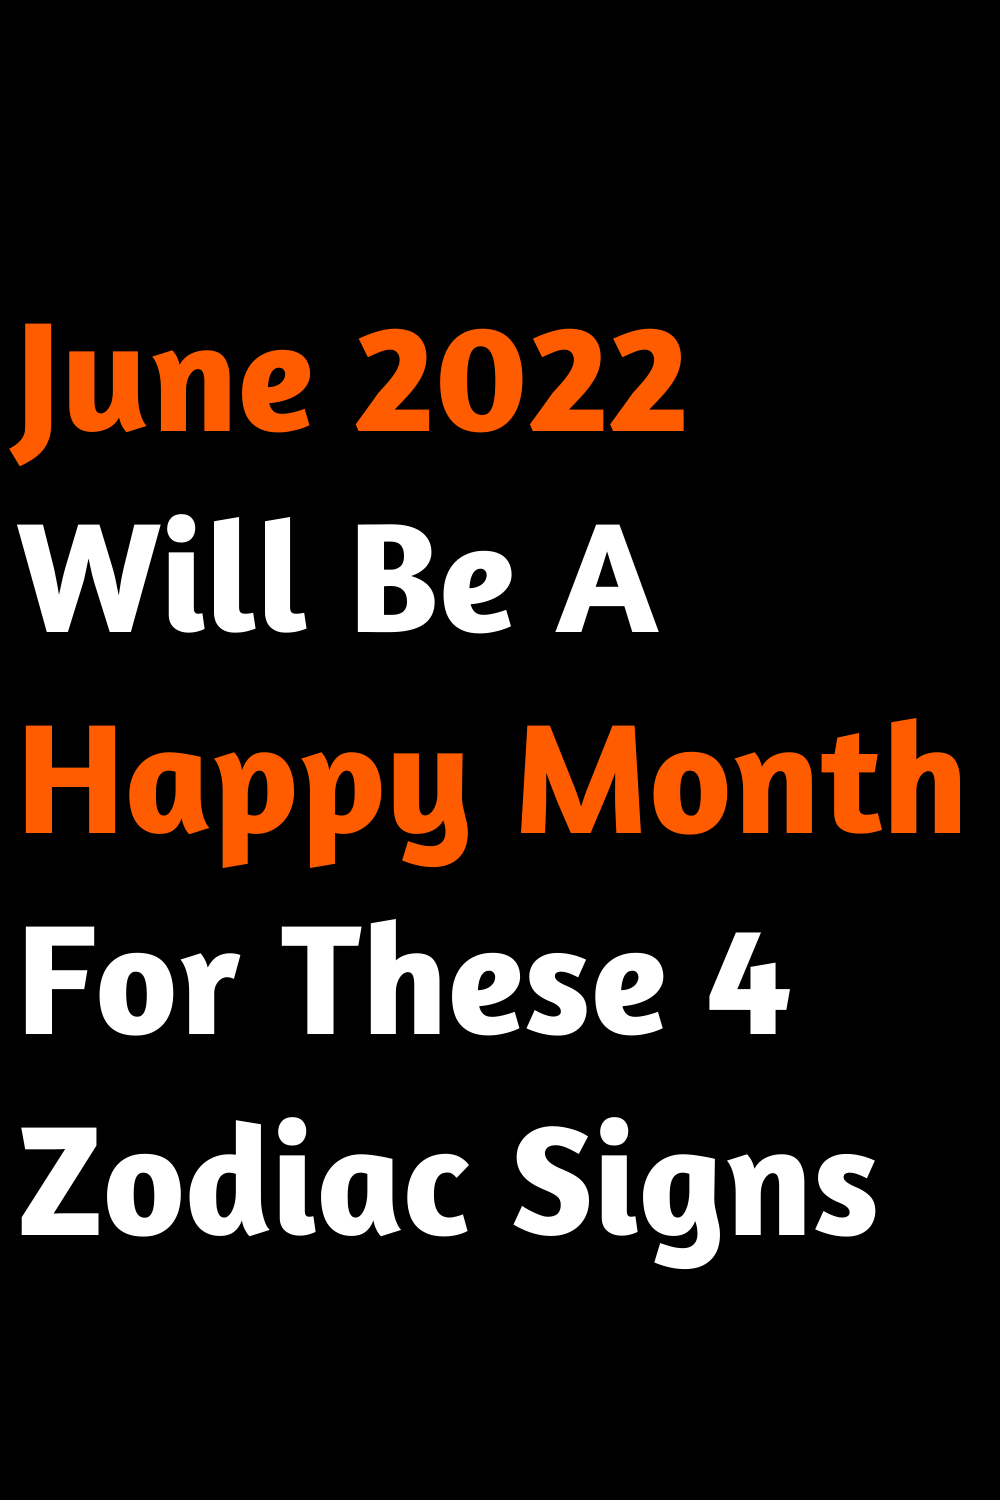 June 2022 Will Be A Happy Month For These 4 Zodiac Signs